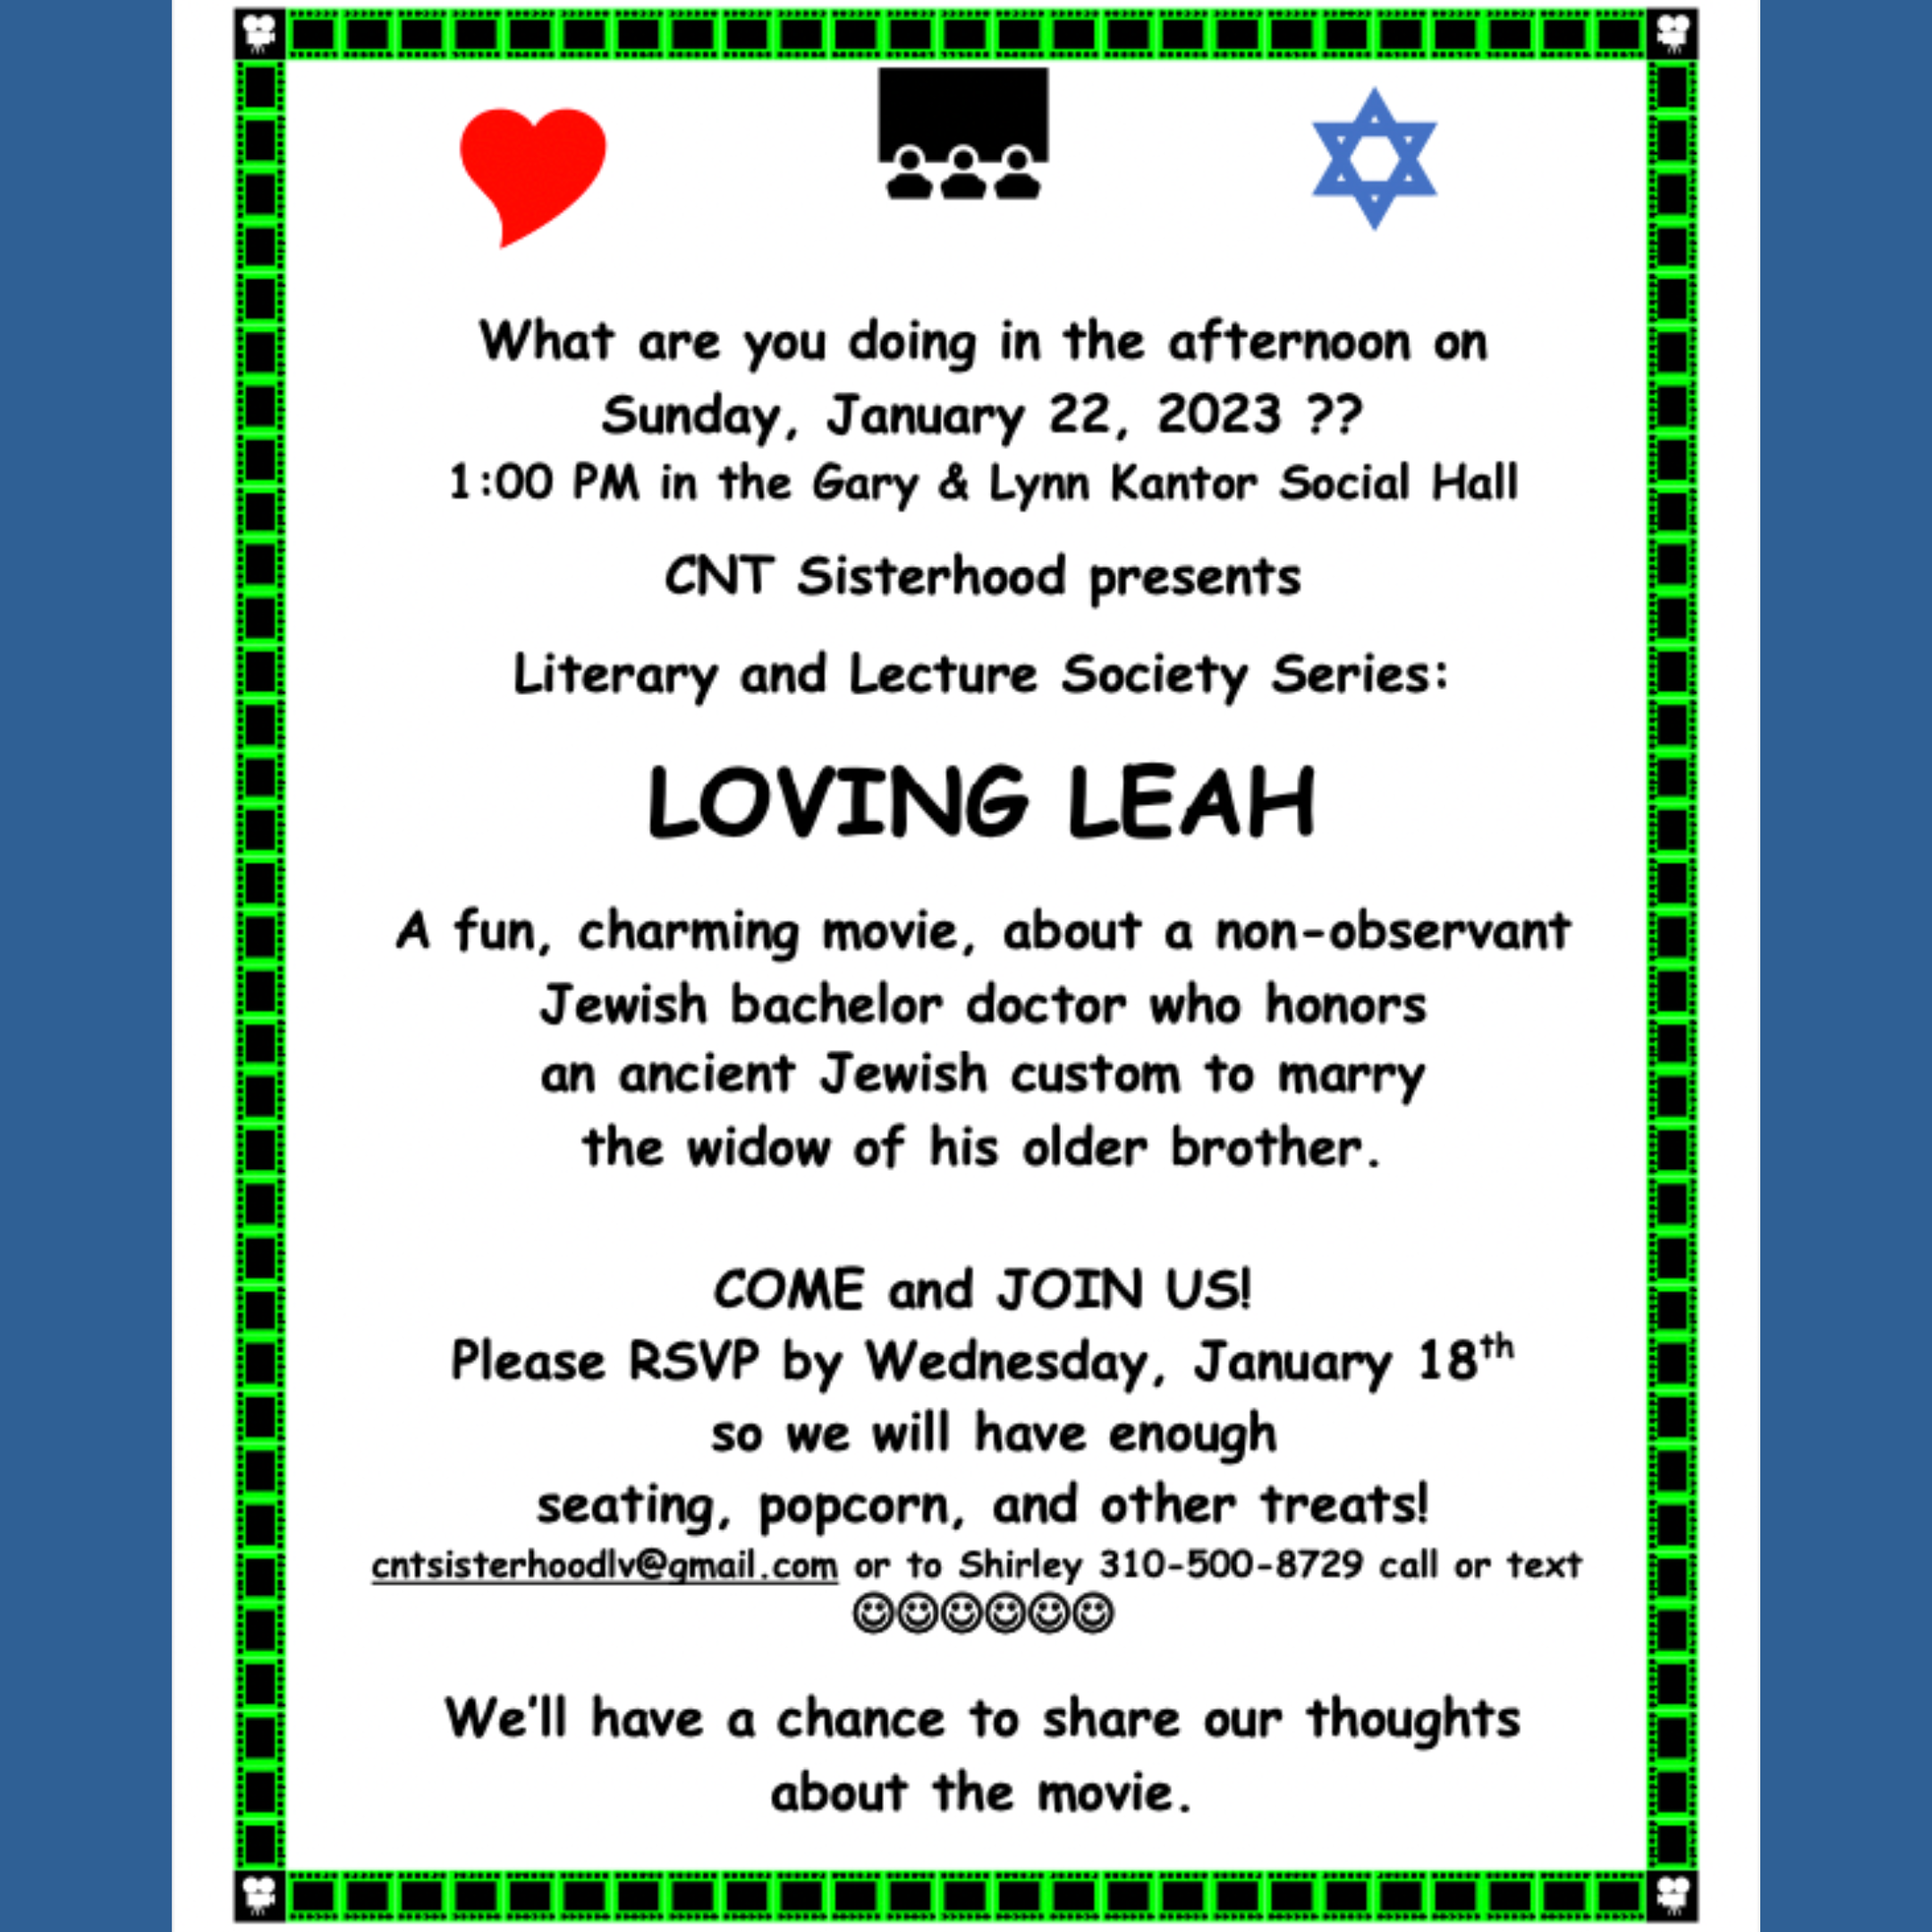 CNT SISTERHOOD'S LITERARY AND LECTURE SOCIETY SERIES “LOVING LEAH”